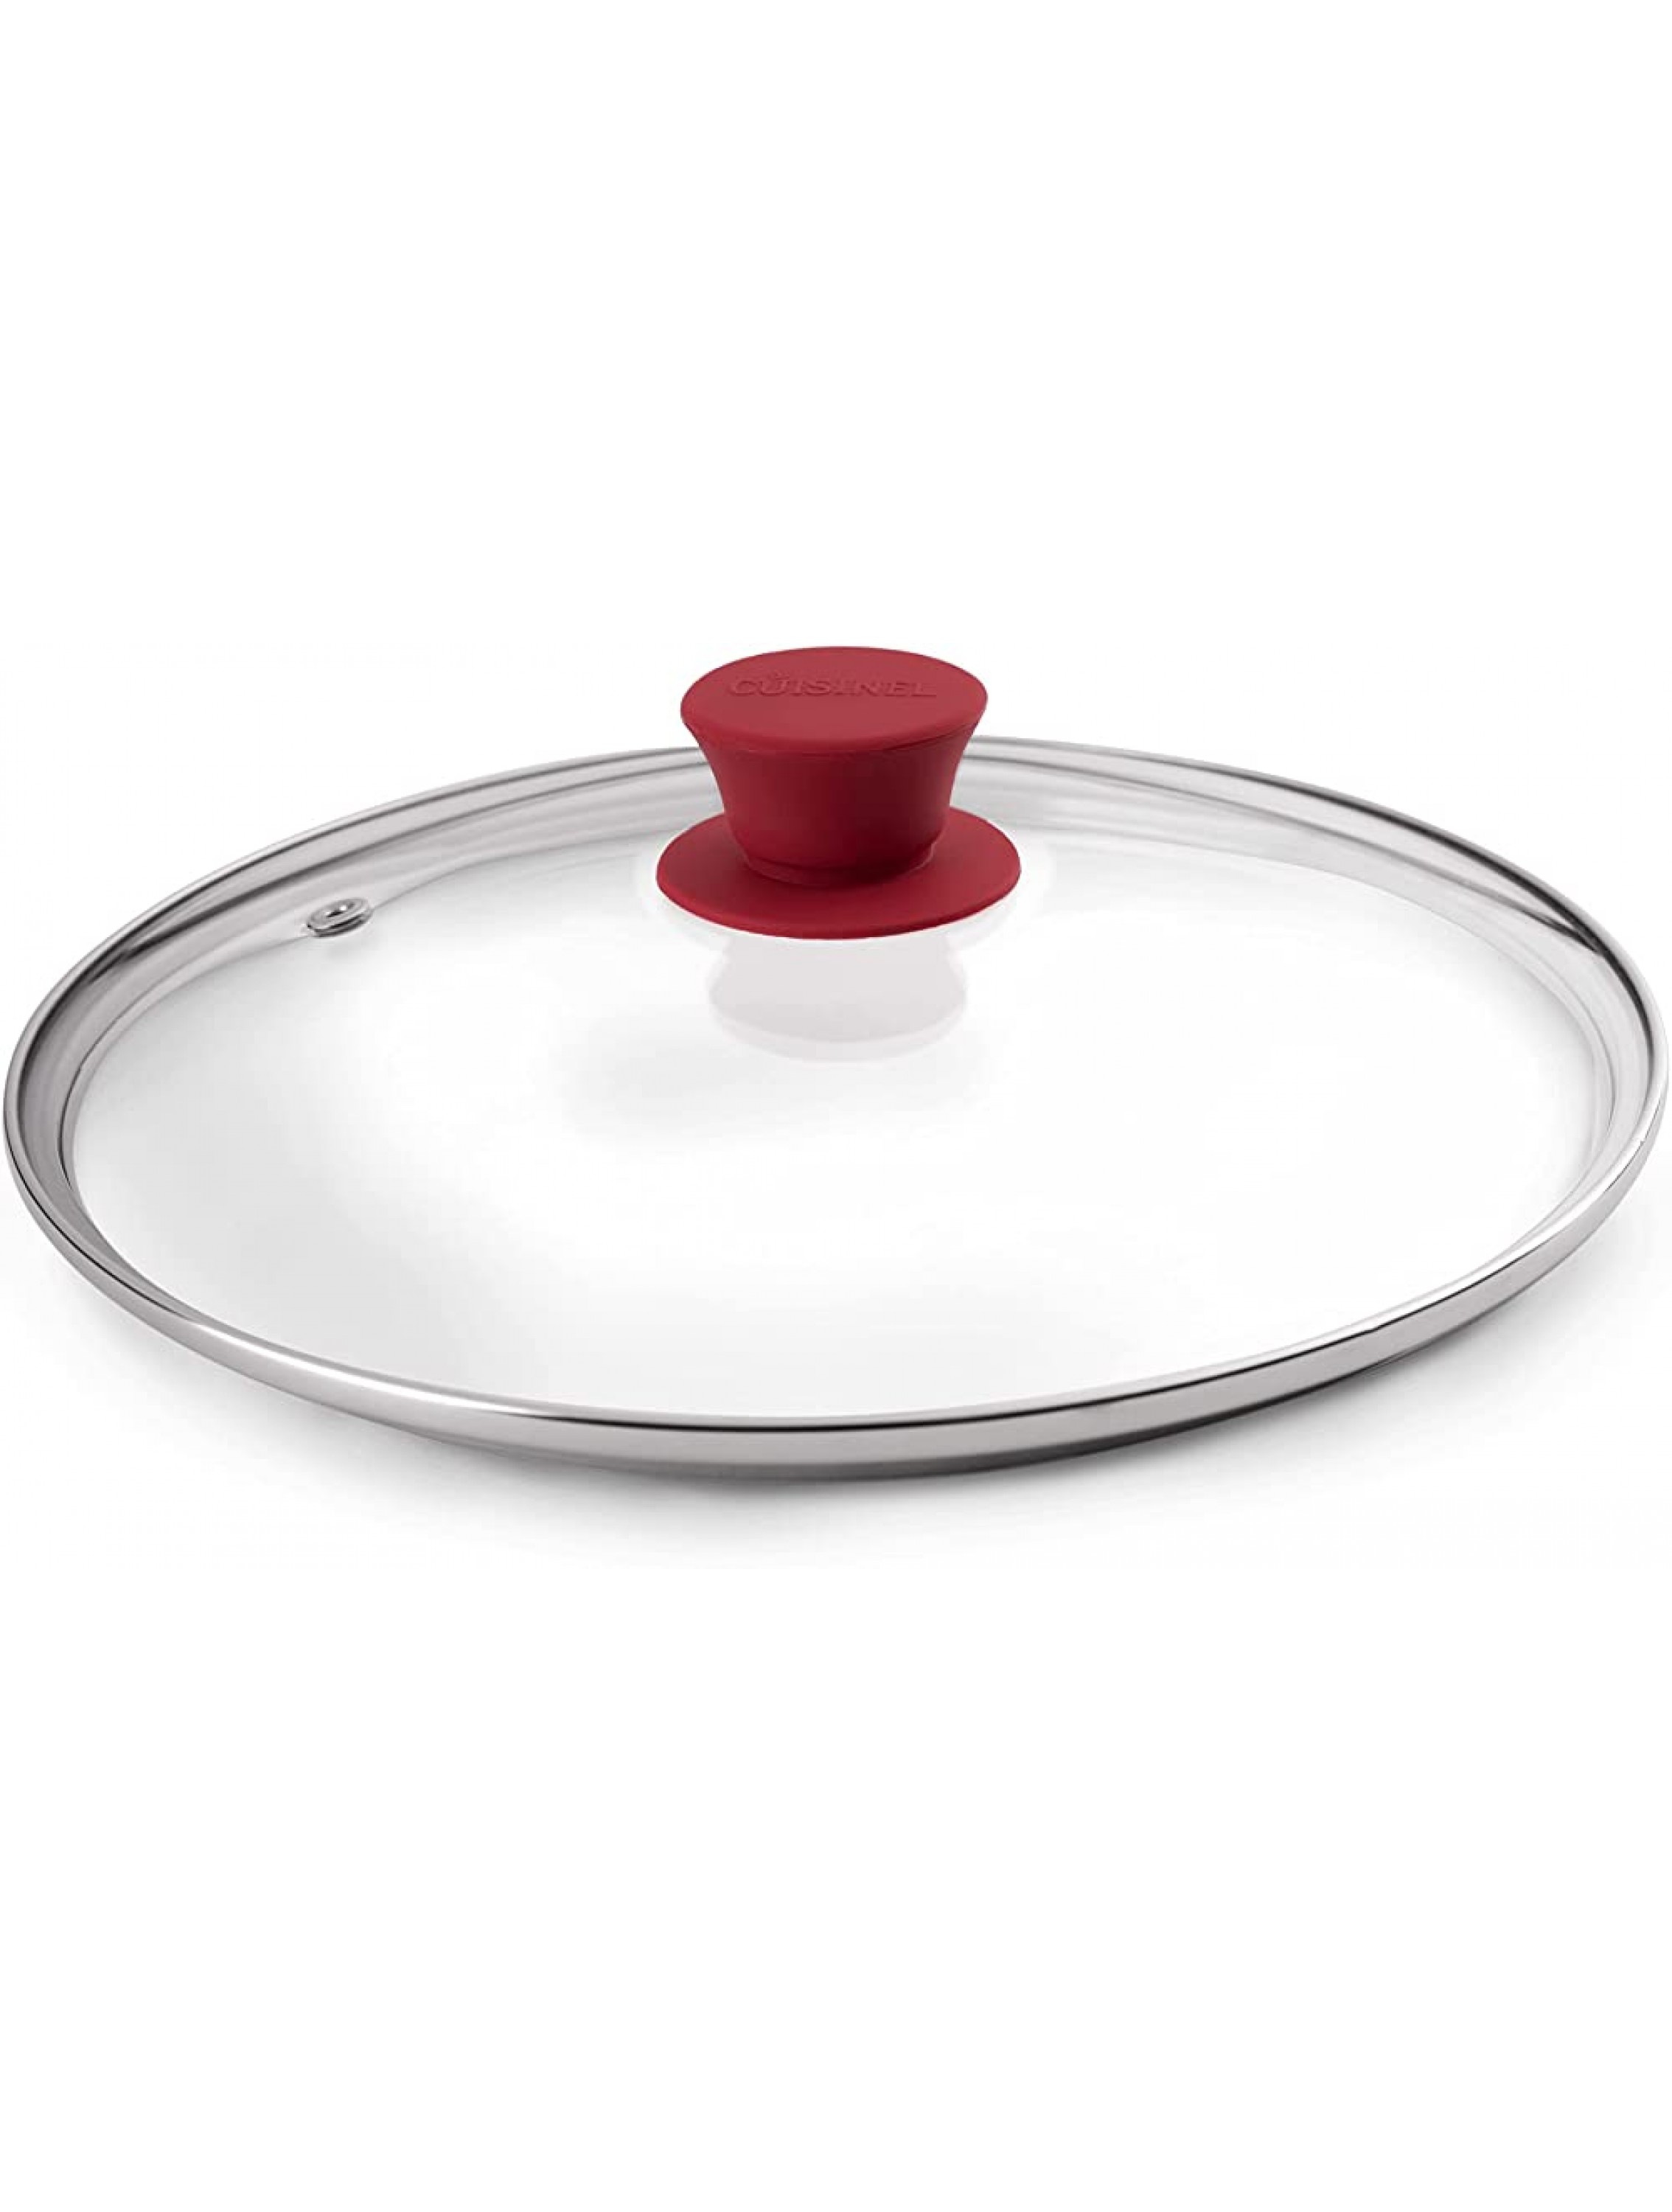 Glass Lid with Steam Vent Hole 10-Inch 25.4-cm Compatible with Lodge Cast Iron Skillet Pan Fully Assembled Universal Replacement Cover Tempered and Oven Safe Reinforced Stainless Steel Rim - BJ83ZOH6O